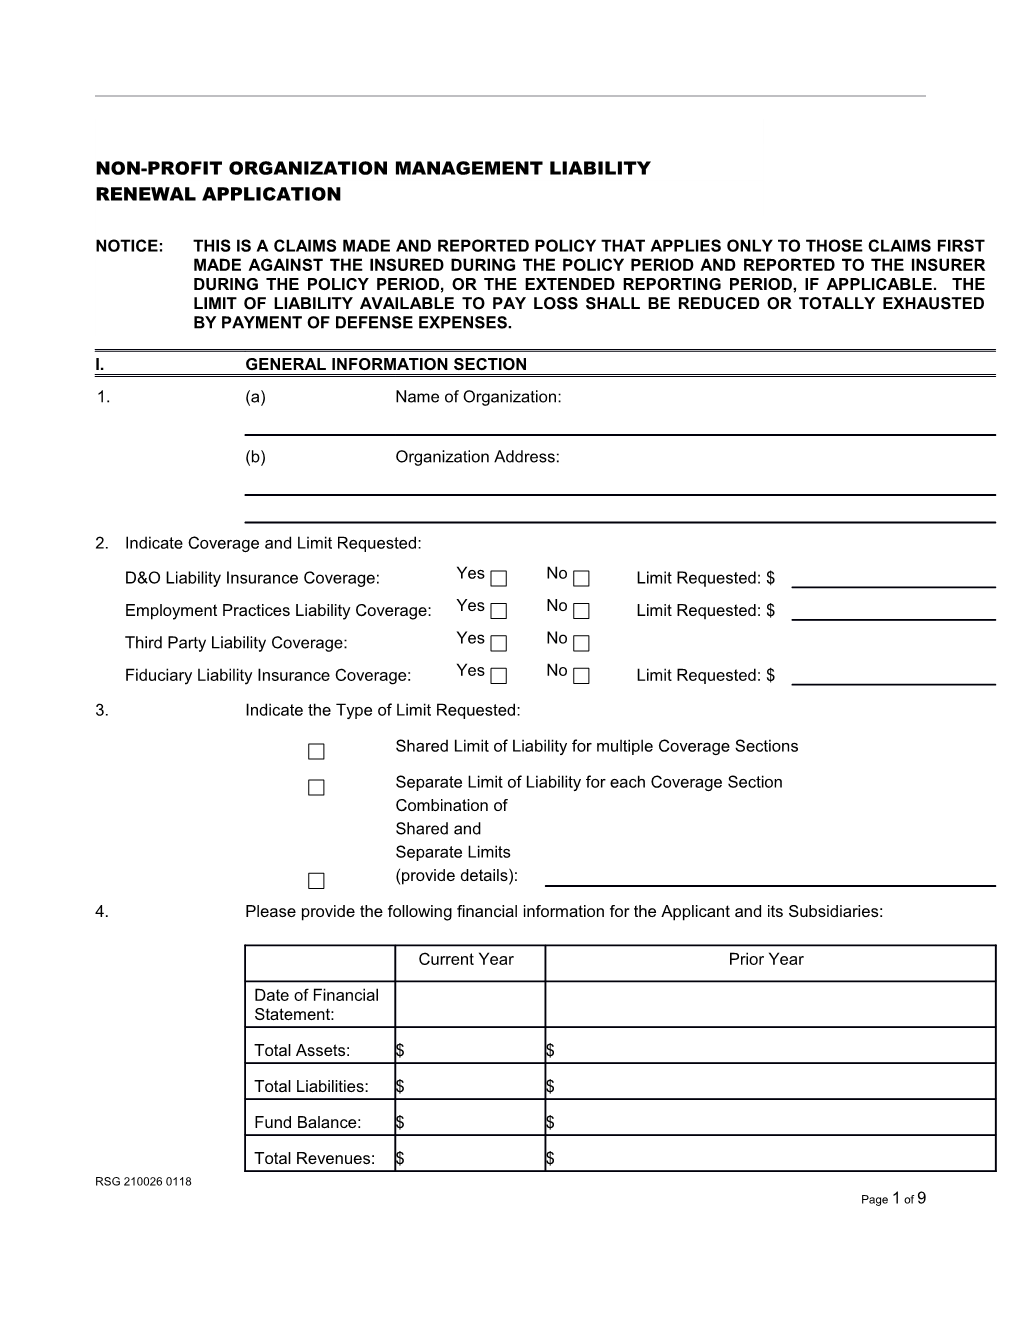 Directors and Officers Liability-Not for Profit Organization Application